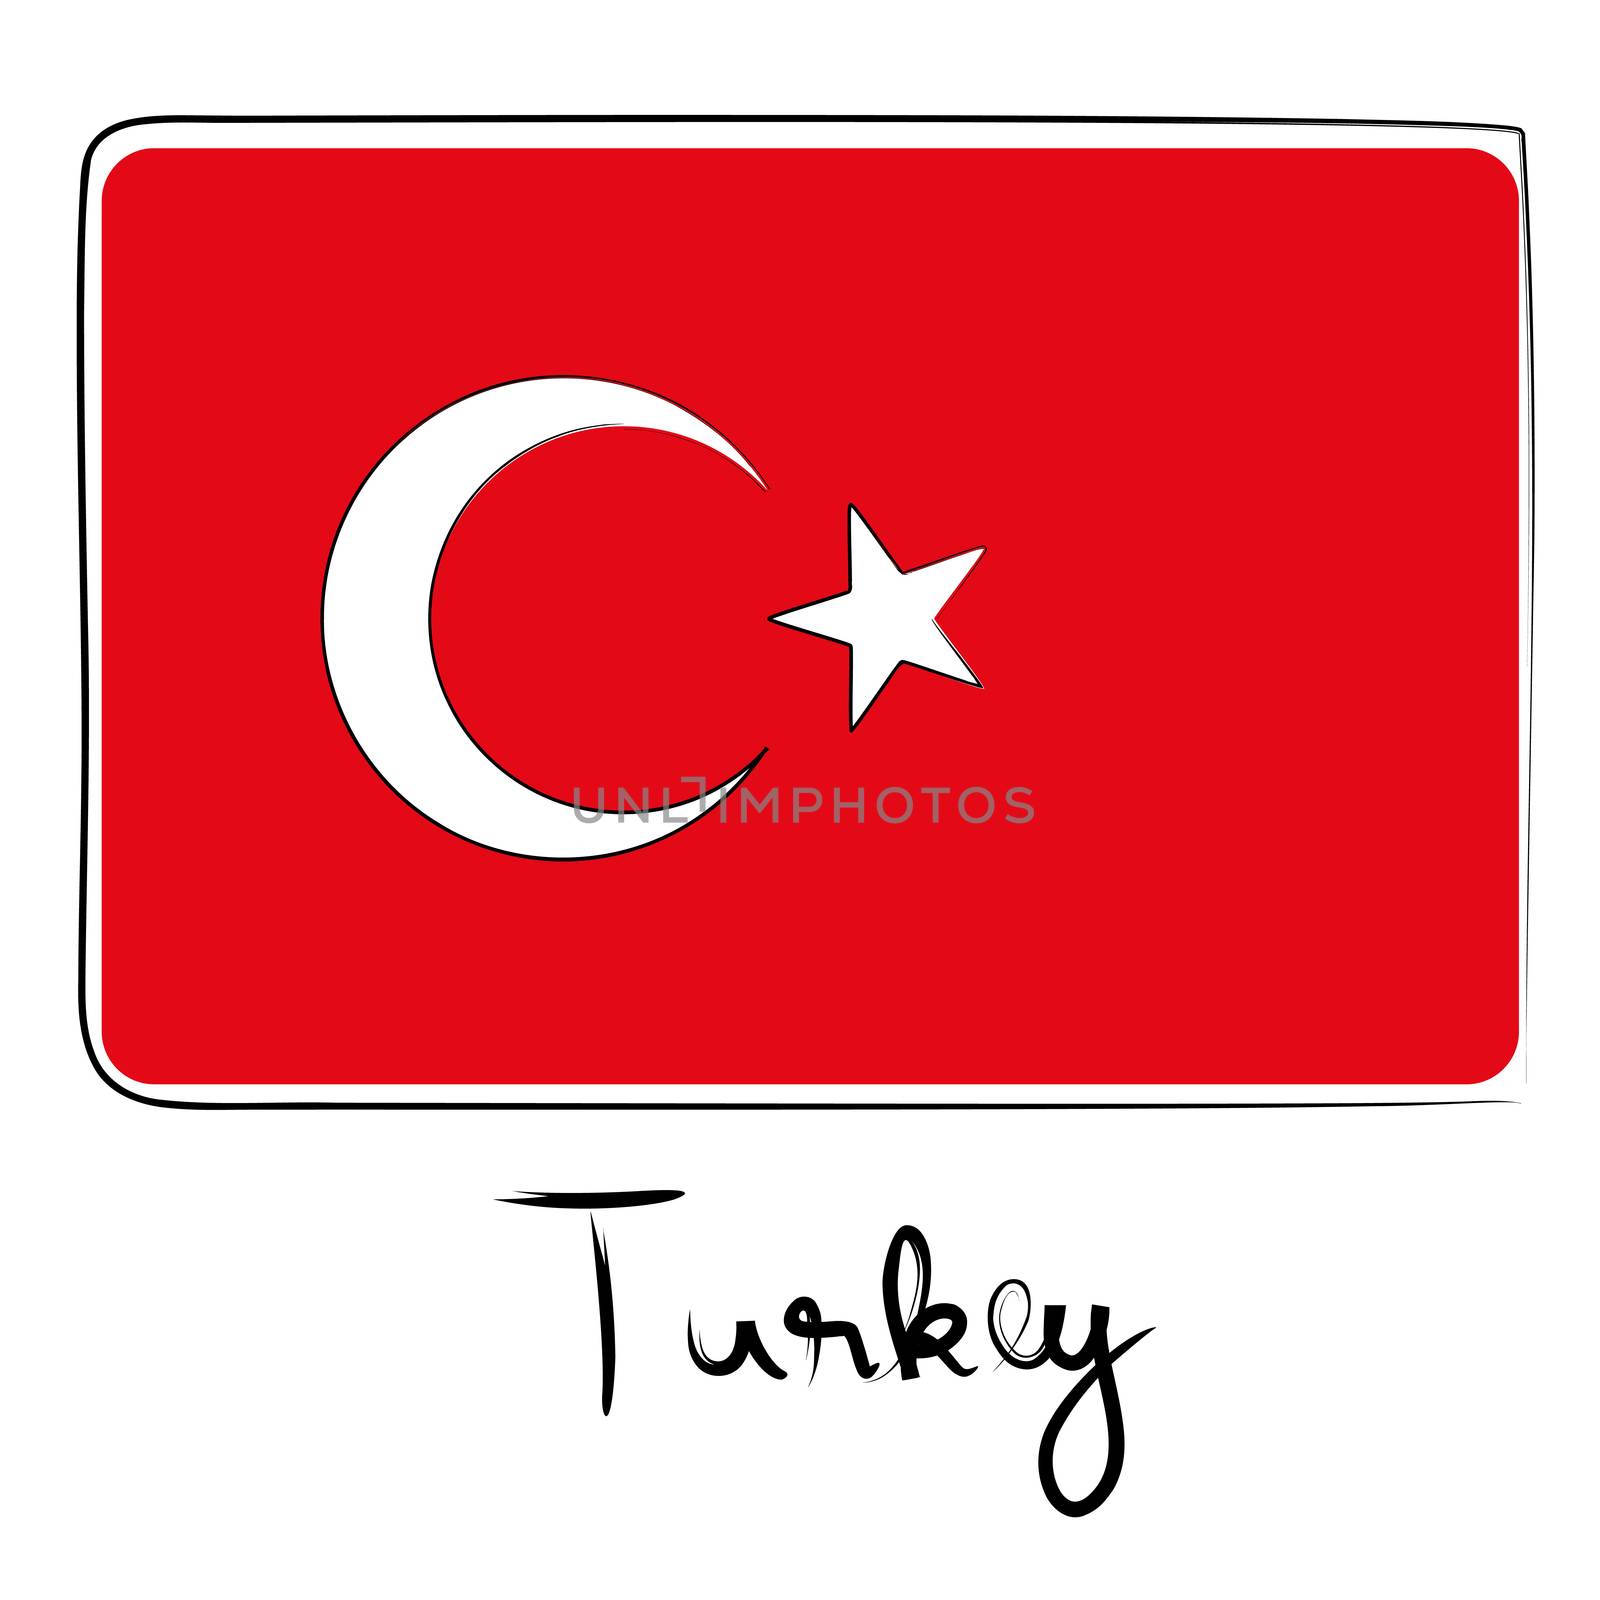 Turkey country flag doodle with text isolated on white